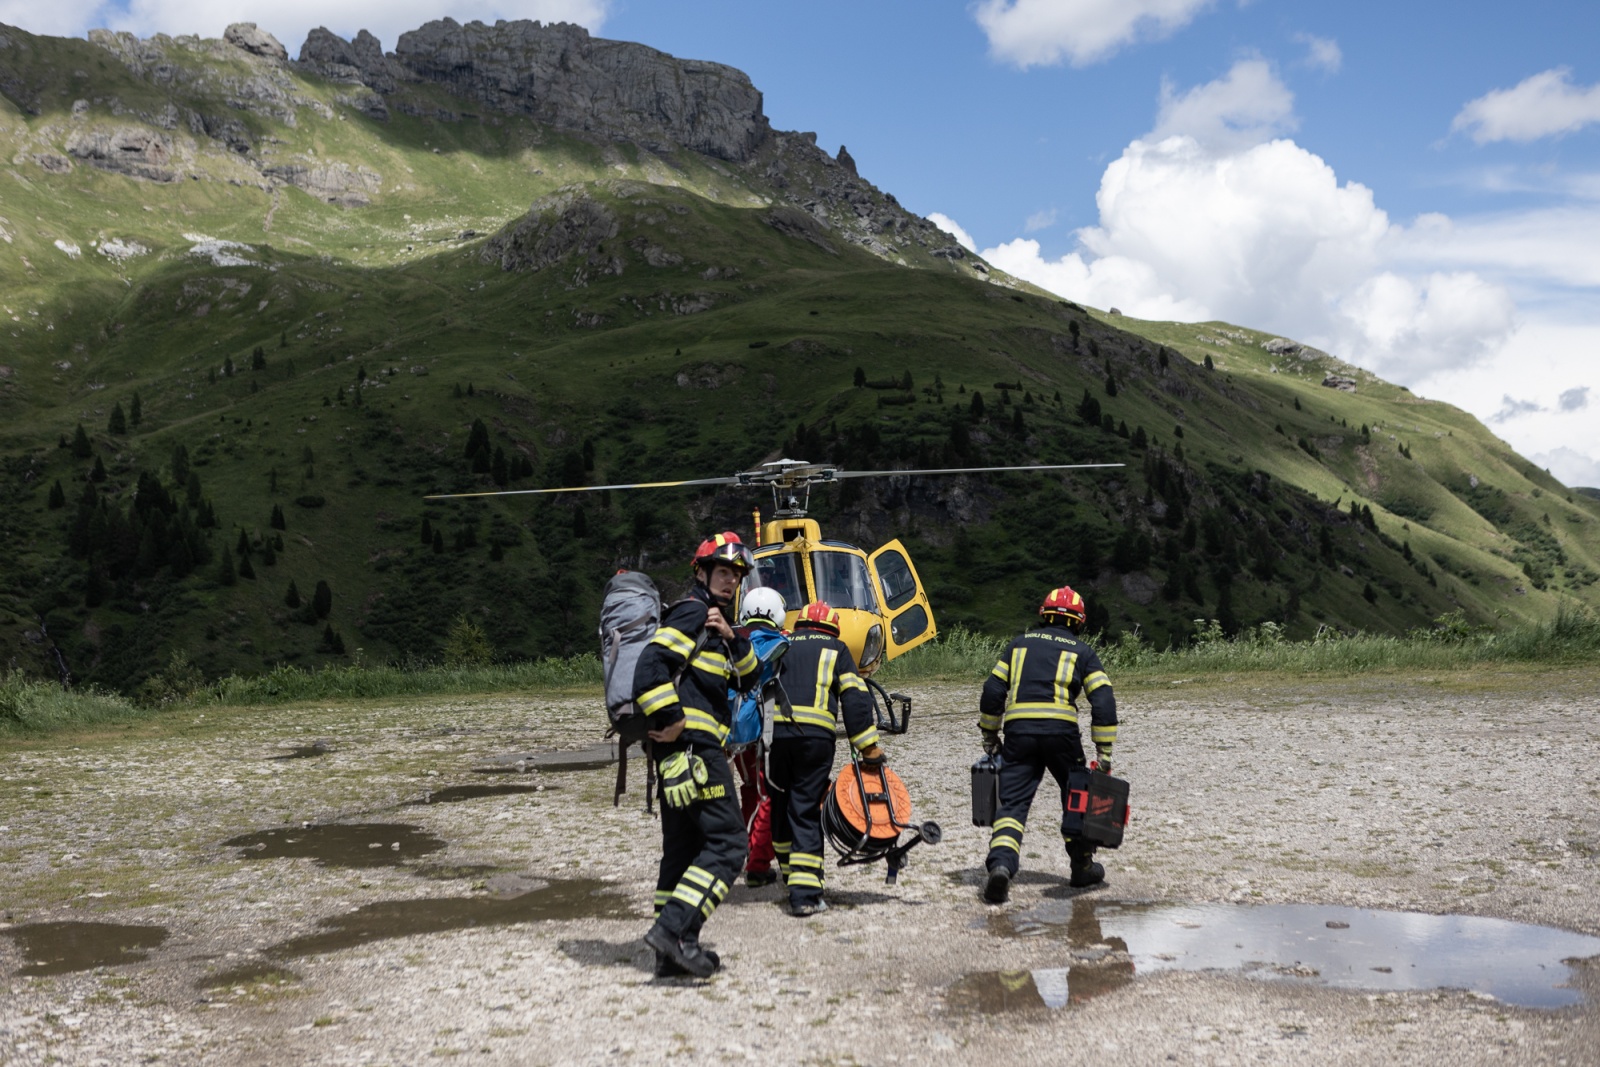 TRENTINO ALTO ADIGE, ITALY - JULY 2022 - Canazei firefighters transport the geo radars that will be used on the Marmolada glacier cap to check its micro-movements in Trentino Alto Adige, on July 5, 2022.